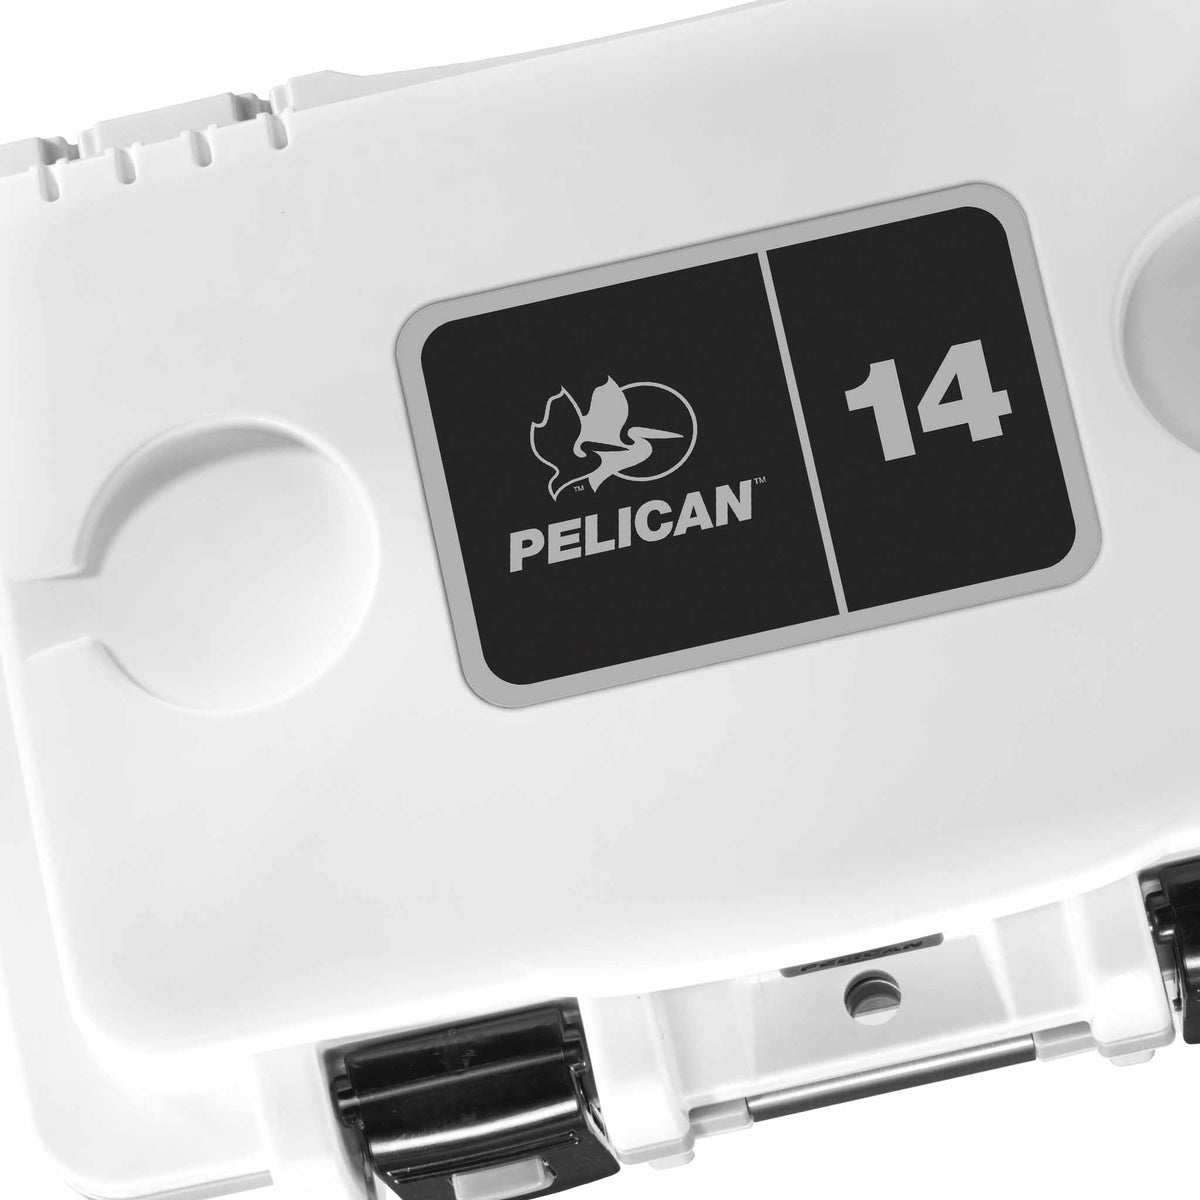 14QT Personal Pelican Cooler comes with two integrated cup holders in the lid